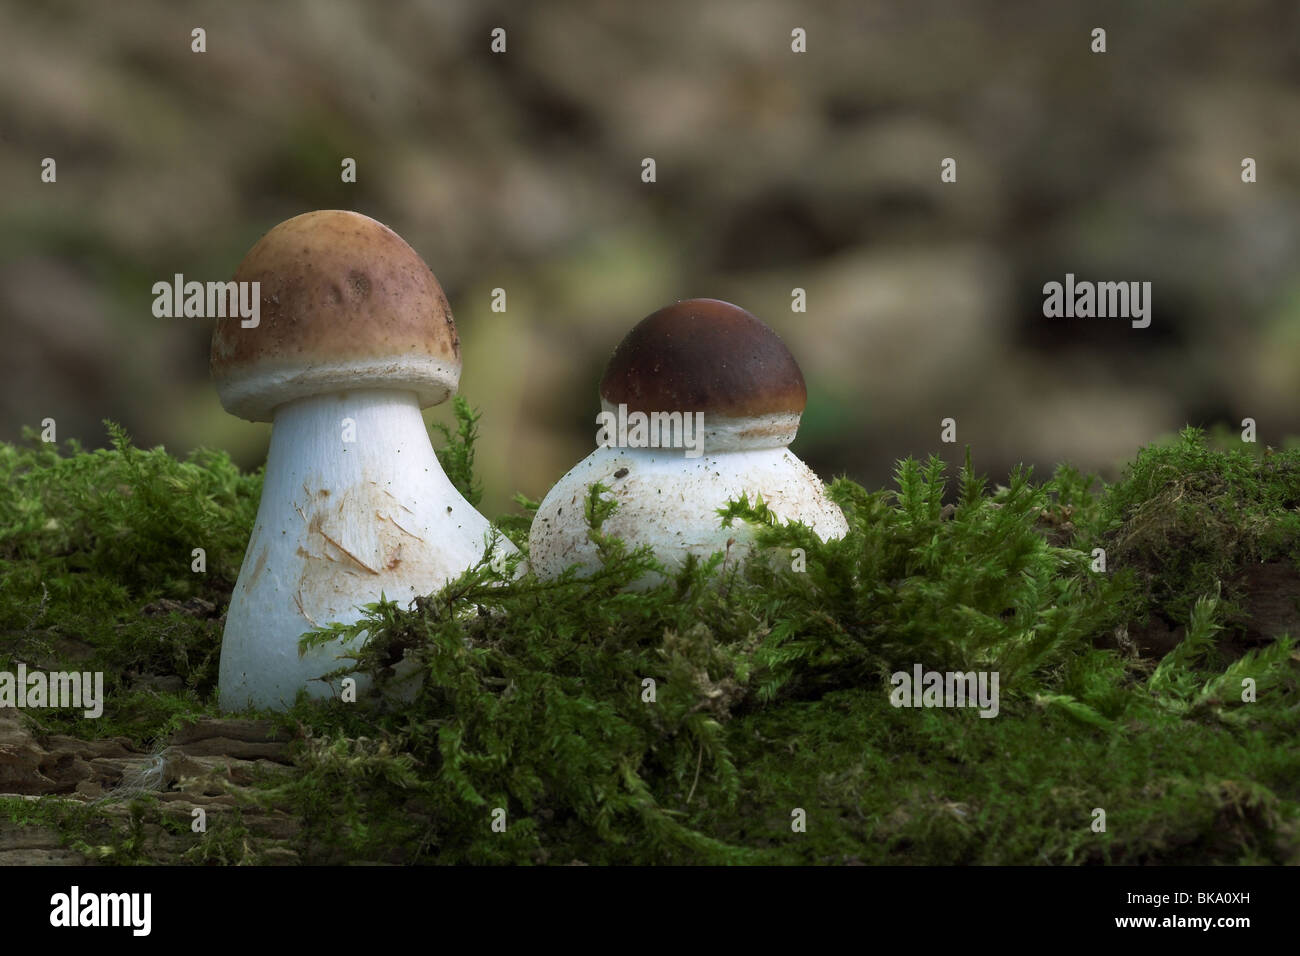 Two young Shaggy Parasols Stock Photo